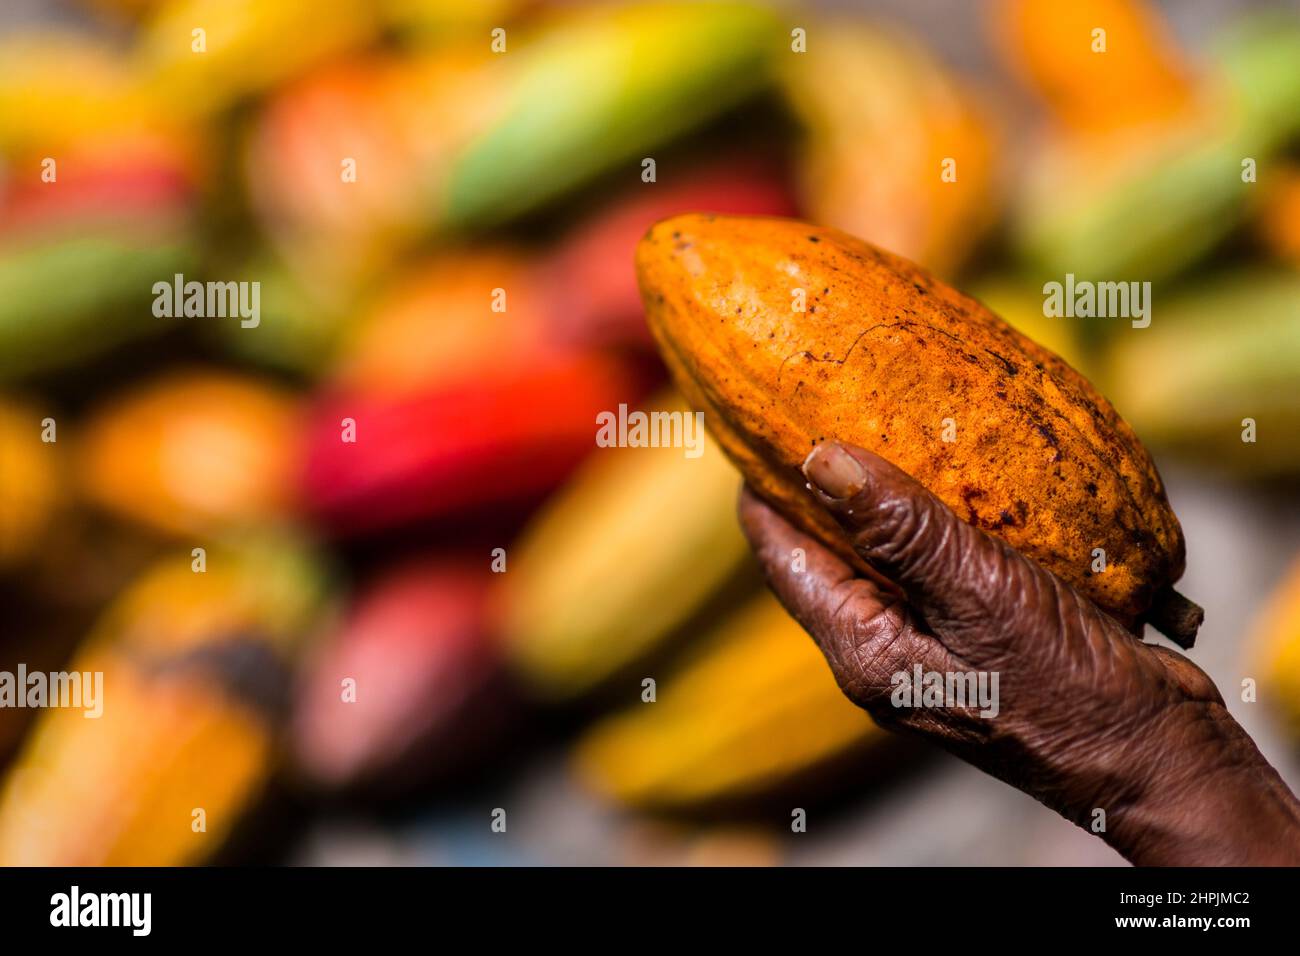 A freshly harvested, ripe cacao pod is seen being held in a hand on a traditional cacao farm in Cuernavaca, Cauca, Colombia. Stock Photo